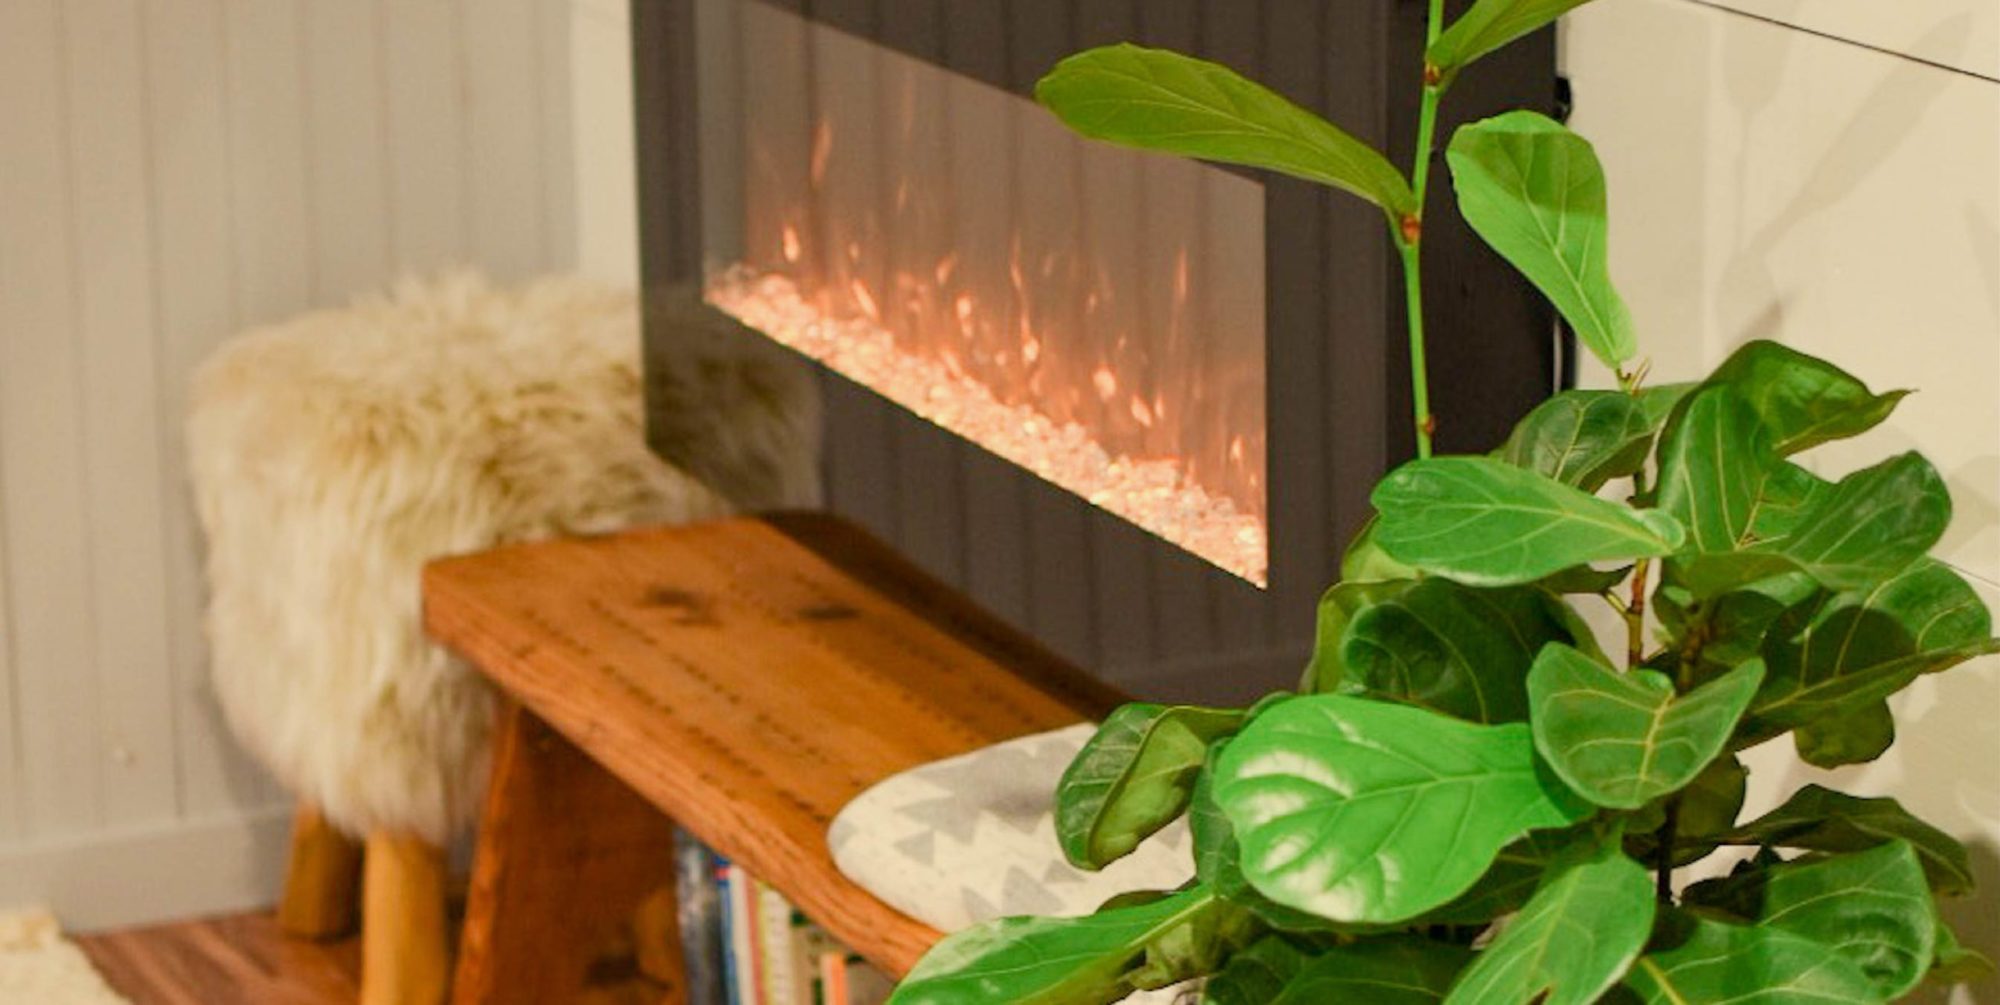 An image of a plant and fuzzy stool next to a fireplace.